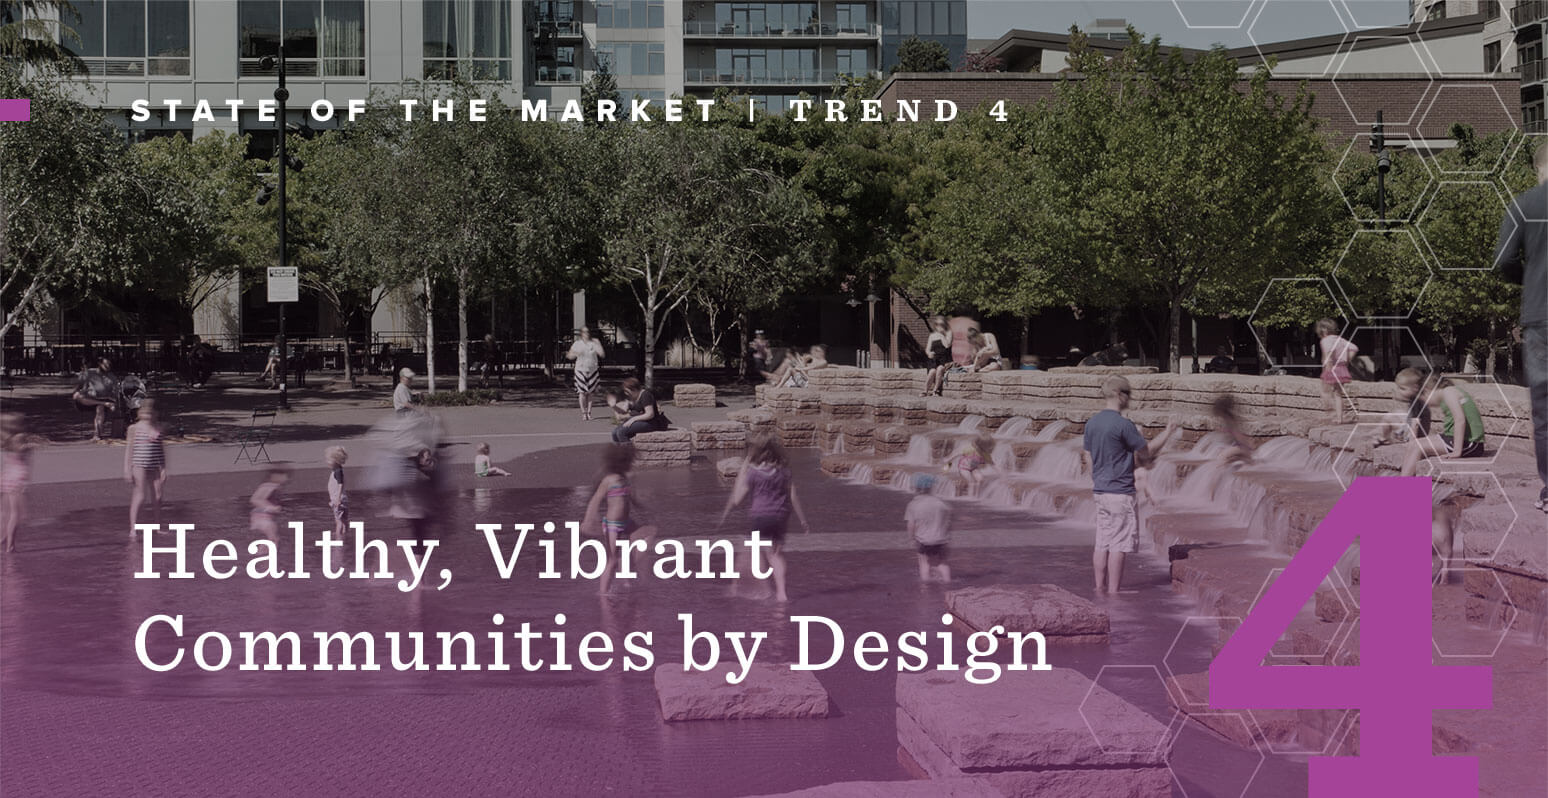 State of the Market: Trend 4 - Healthy, Vibrant Communities by Design